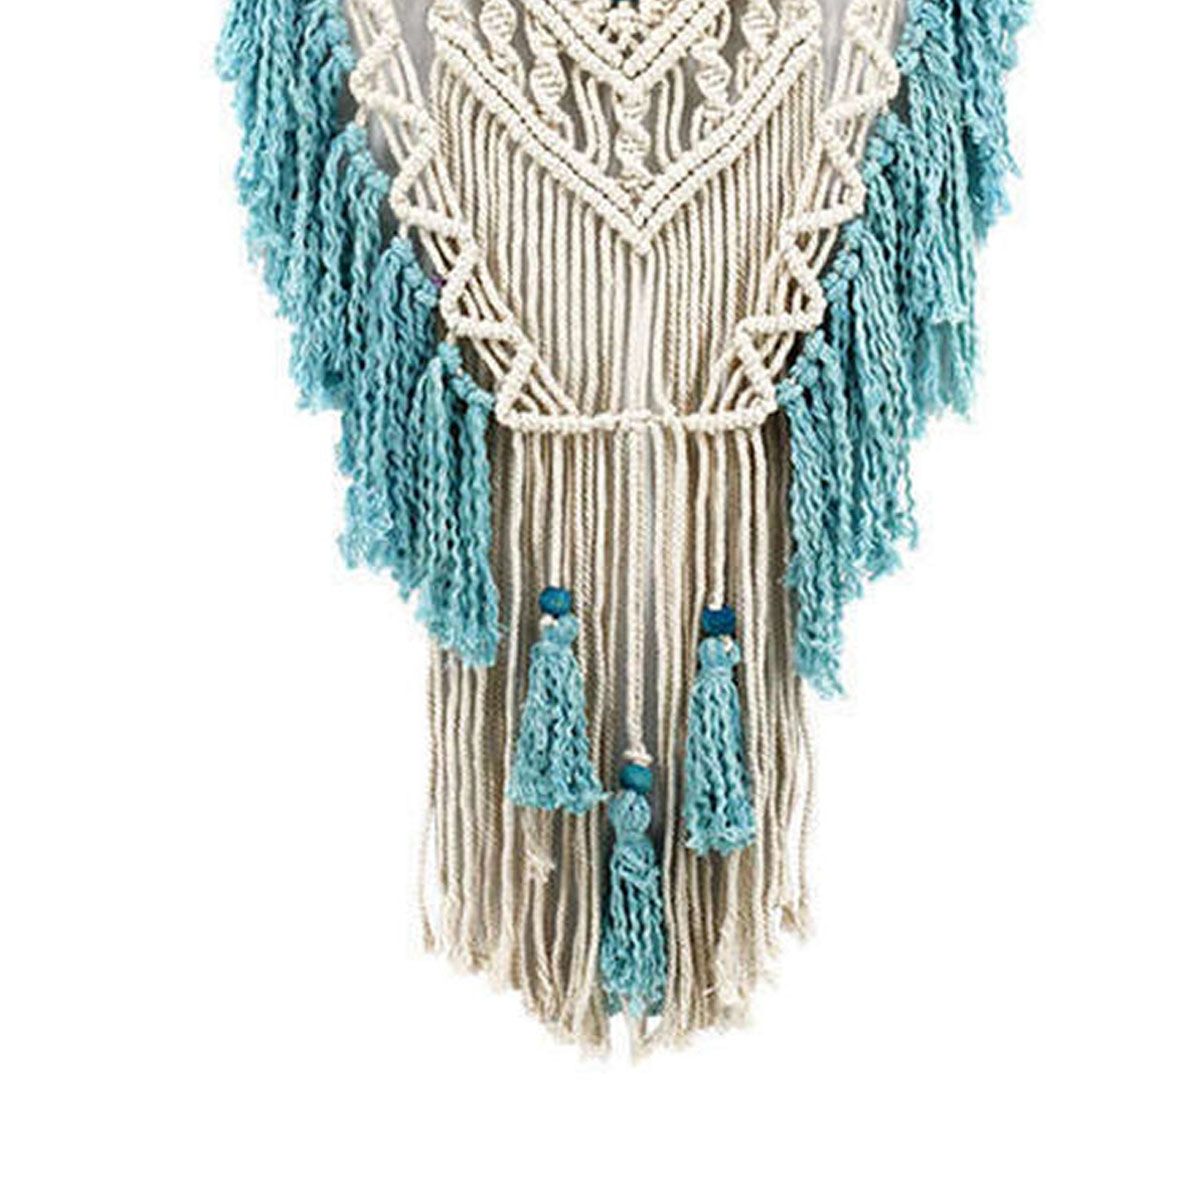 Hand-Knotted-Macrame-Wall-Art-Handmade-Bohemian-Hanging-Tapestry-Room-Decorations-1637667